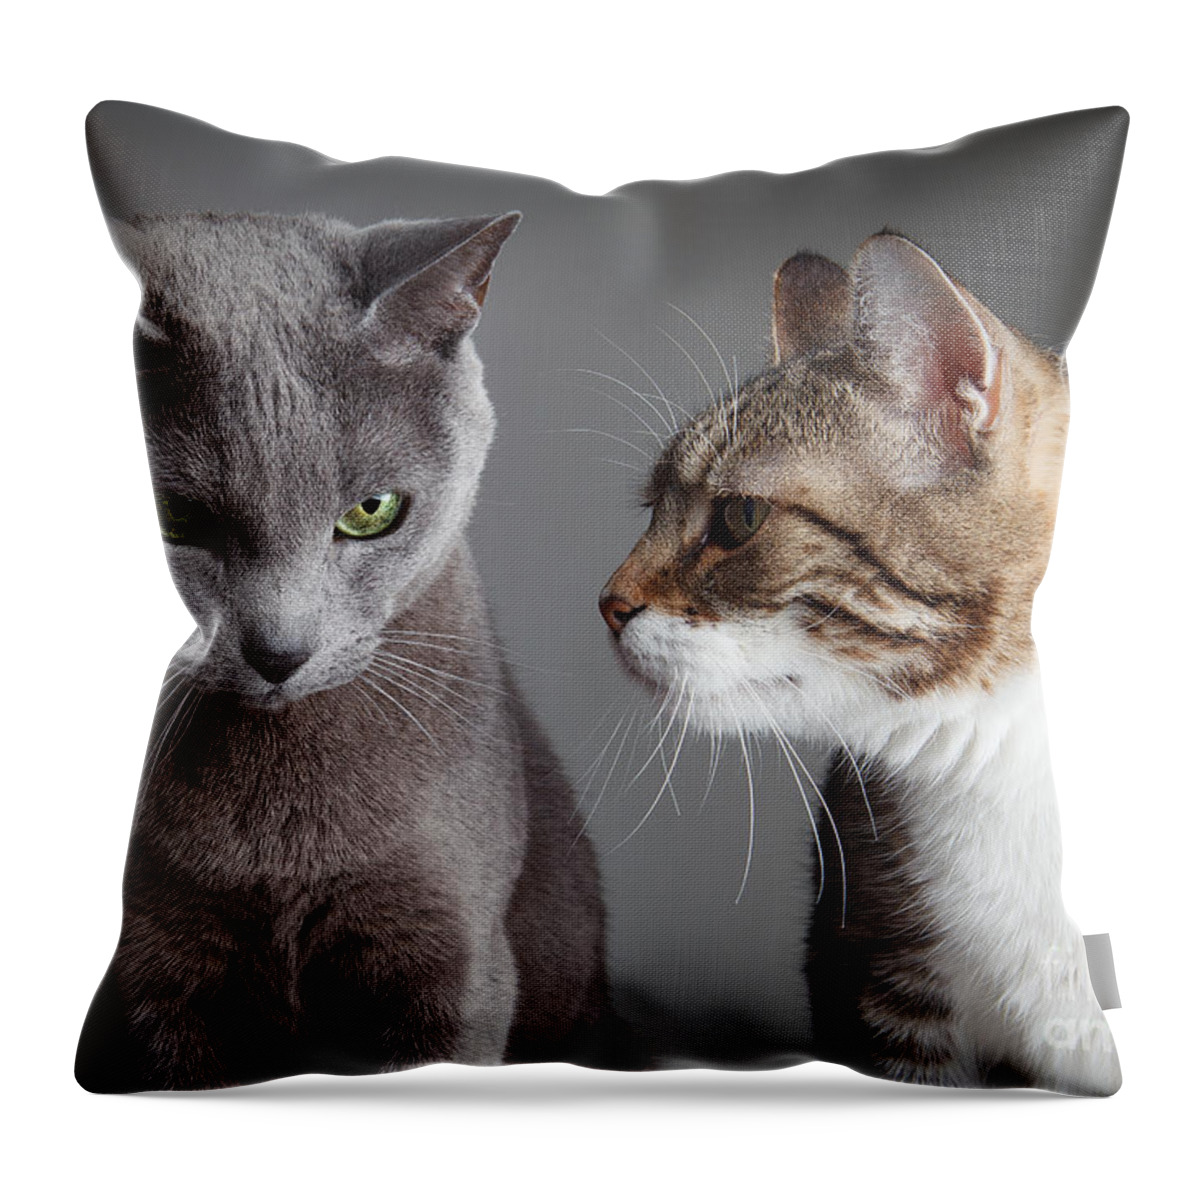 Cat Throw Pillow featuring the photograph Two Cats #2 by Nailia Schwarz